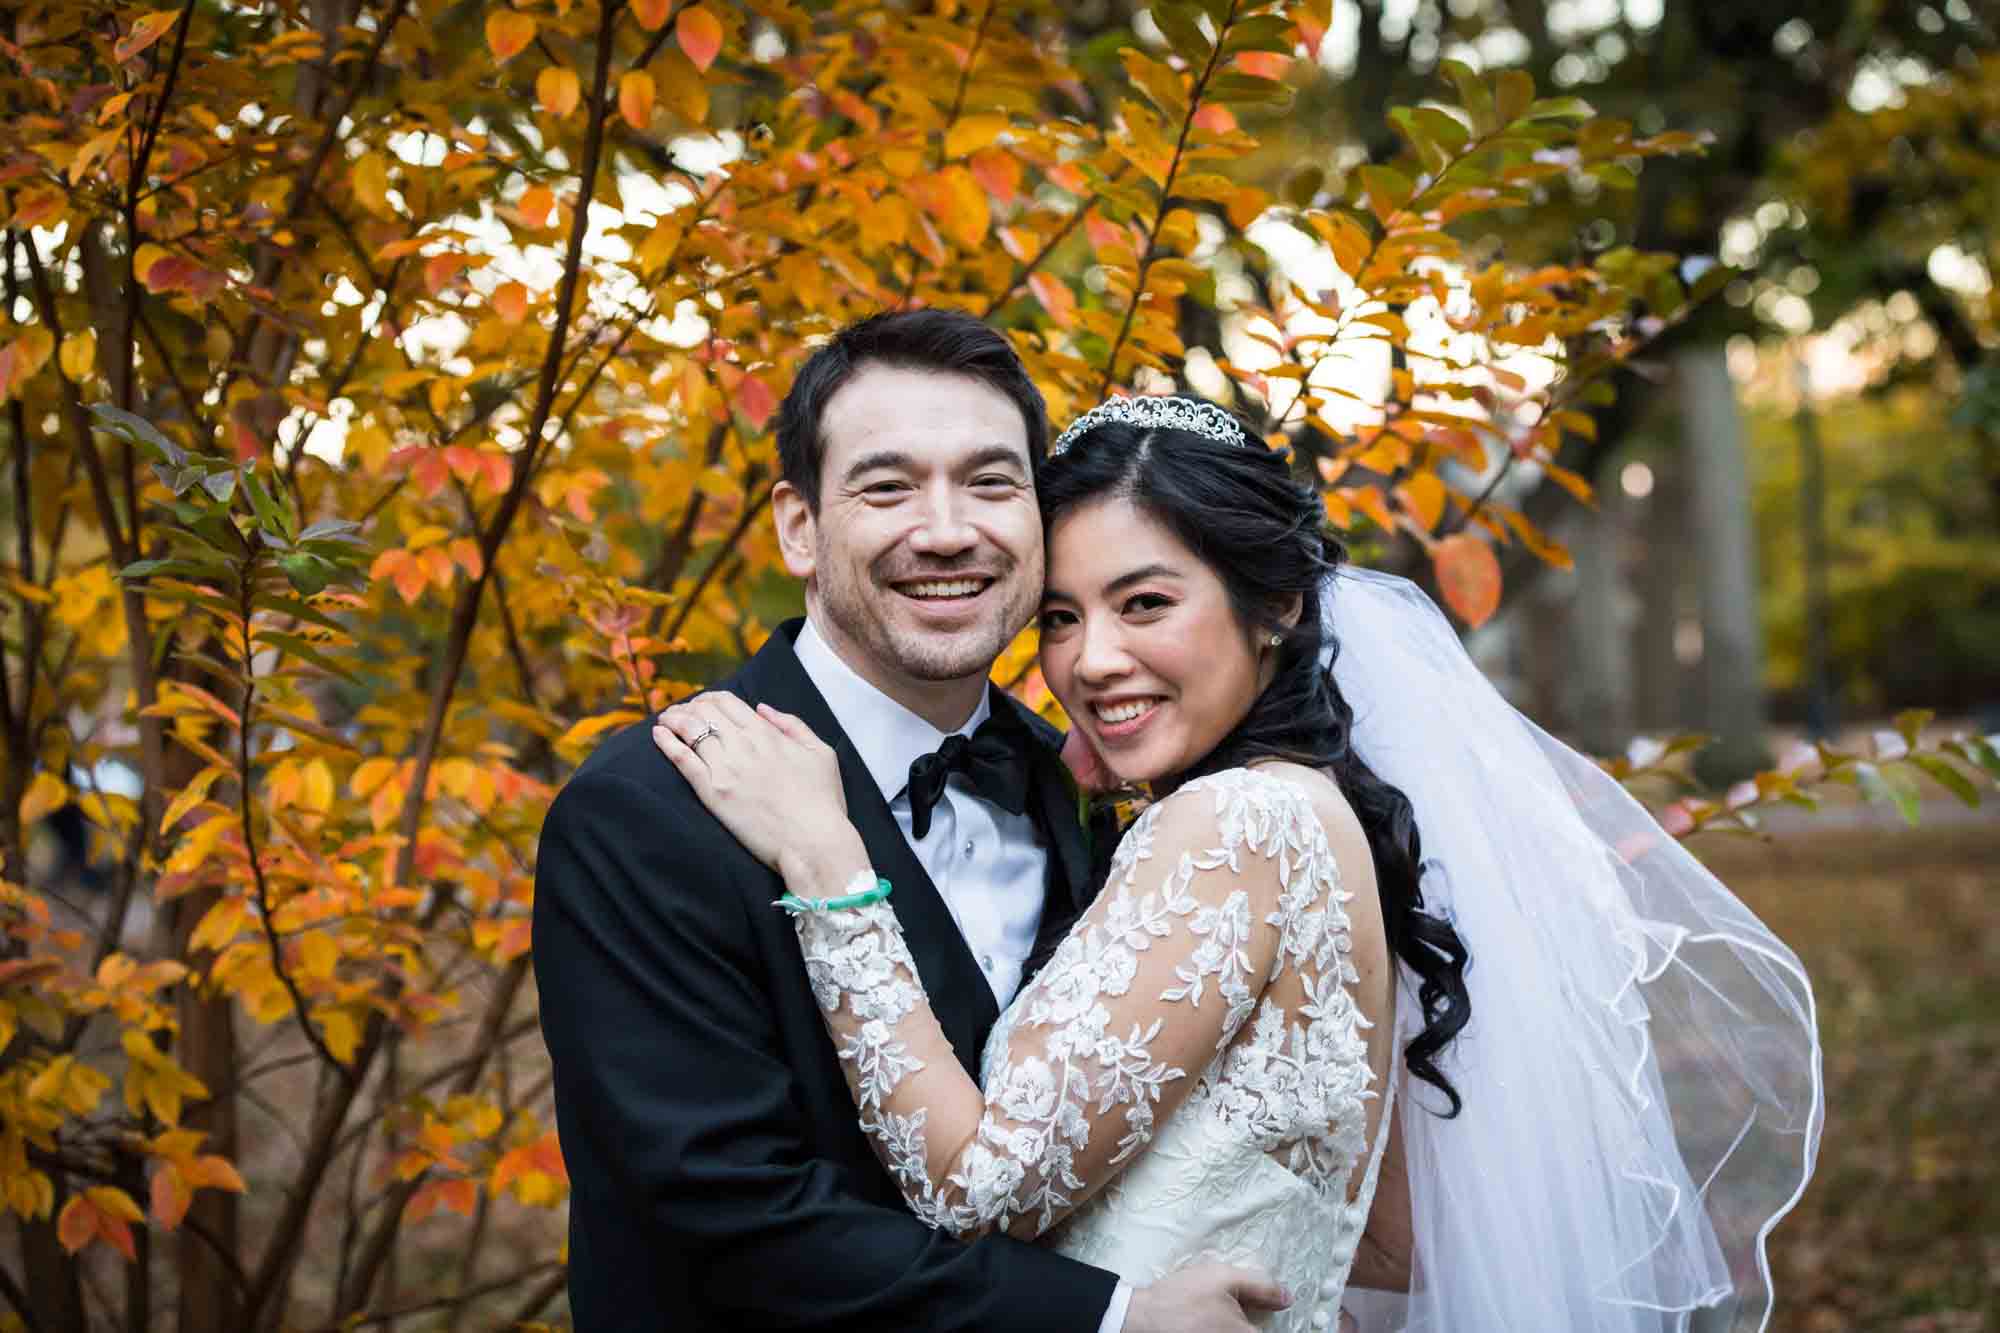 Bride and groom hugging in front of tree with yellow leaves